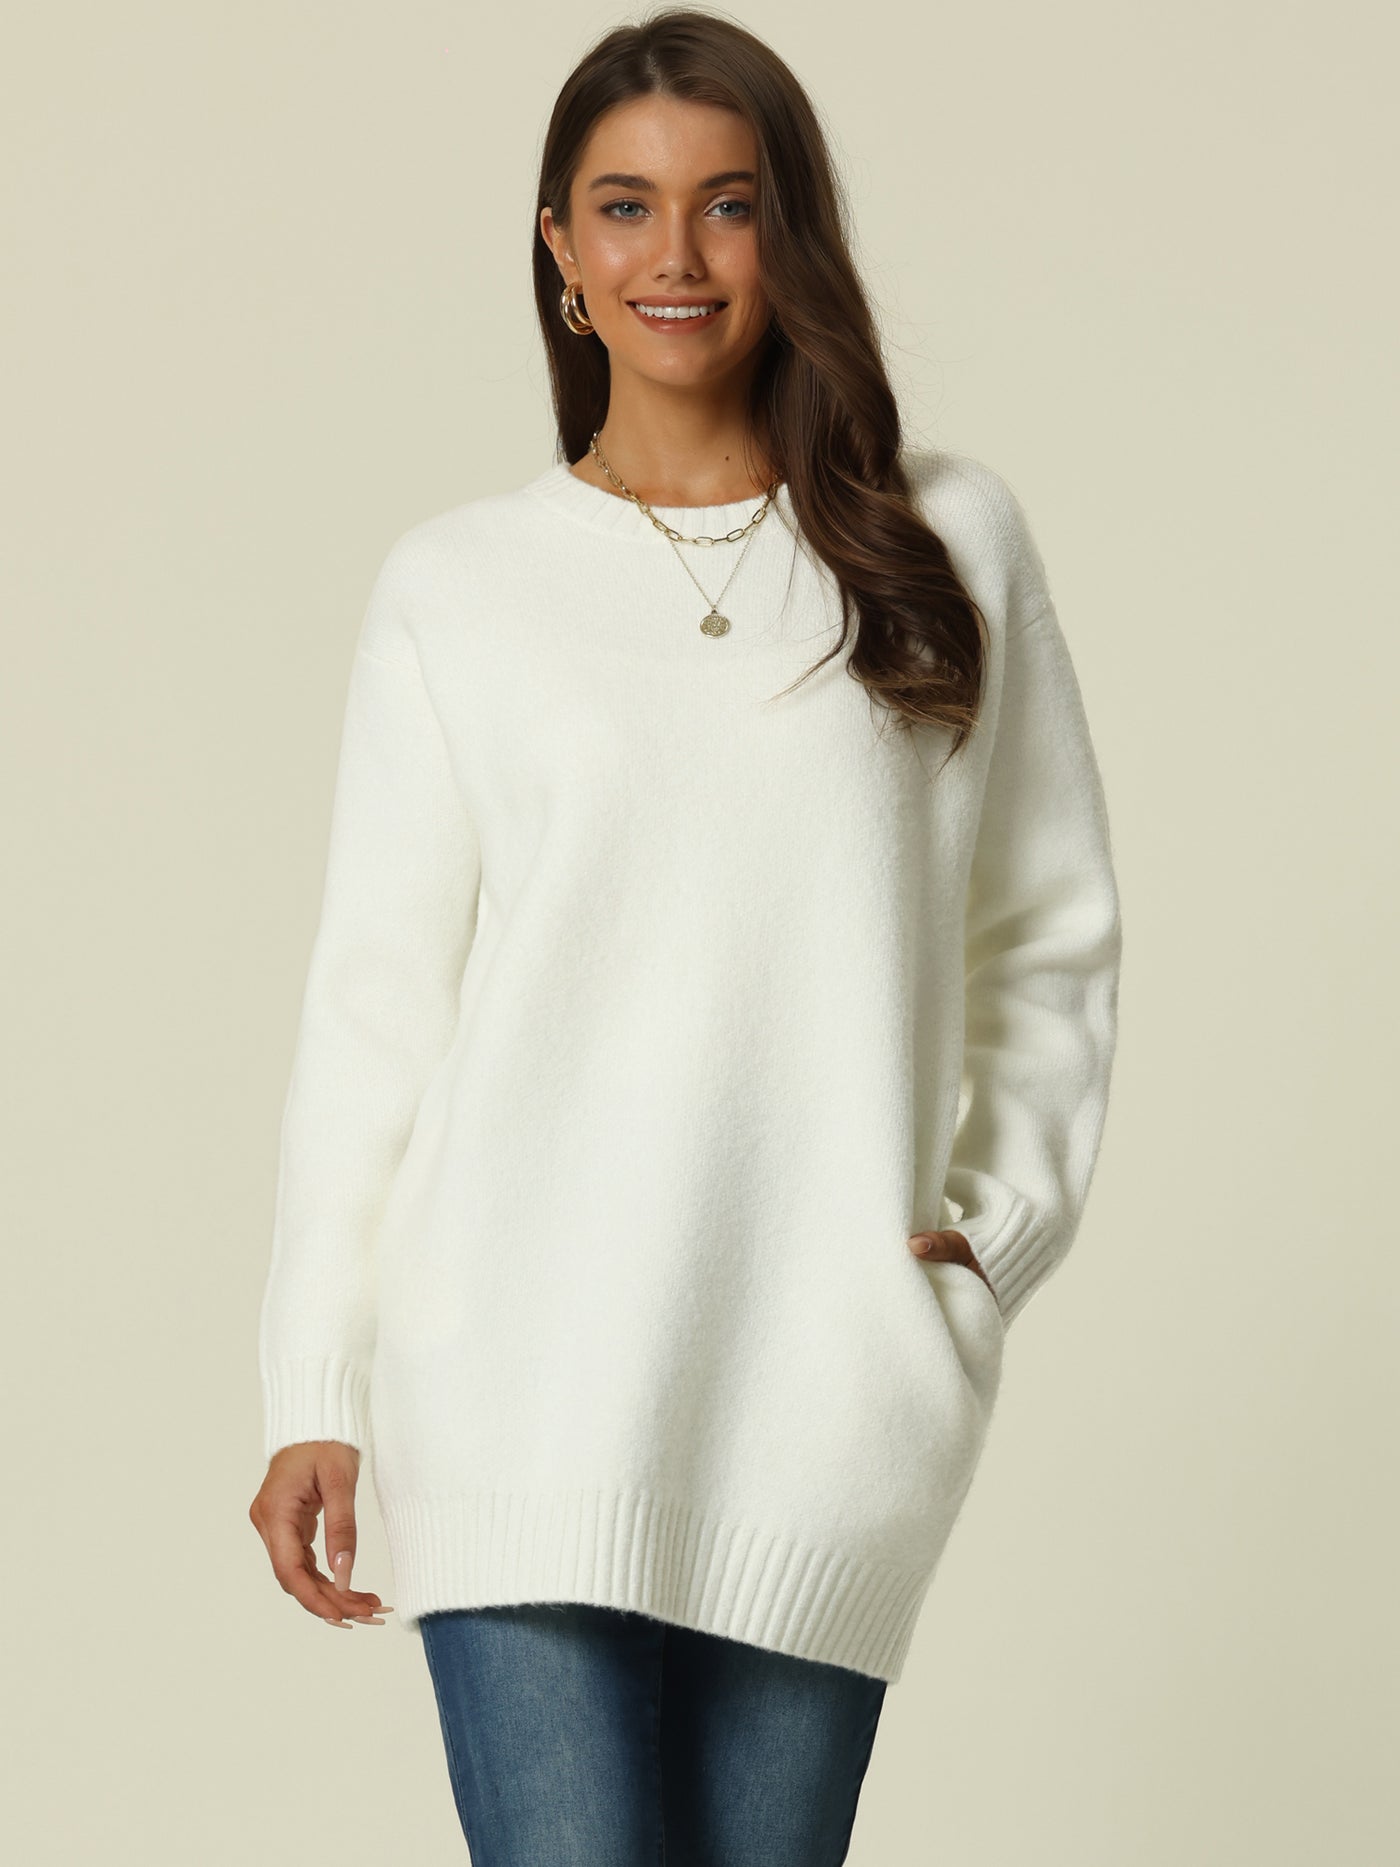 Bublédon Womens' Fall Winter Round Neck Long Sleeve Casual Sweater with Pockets